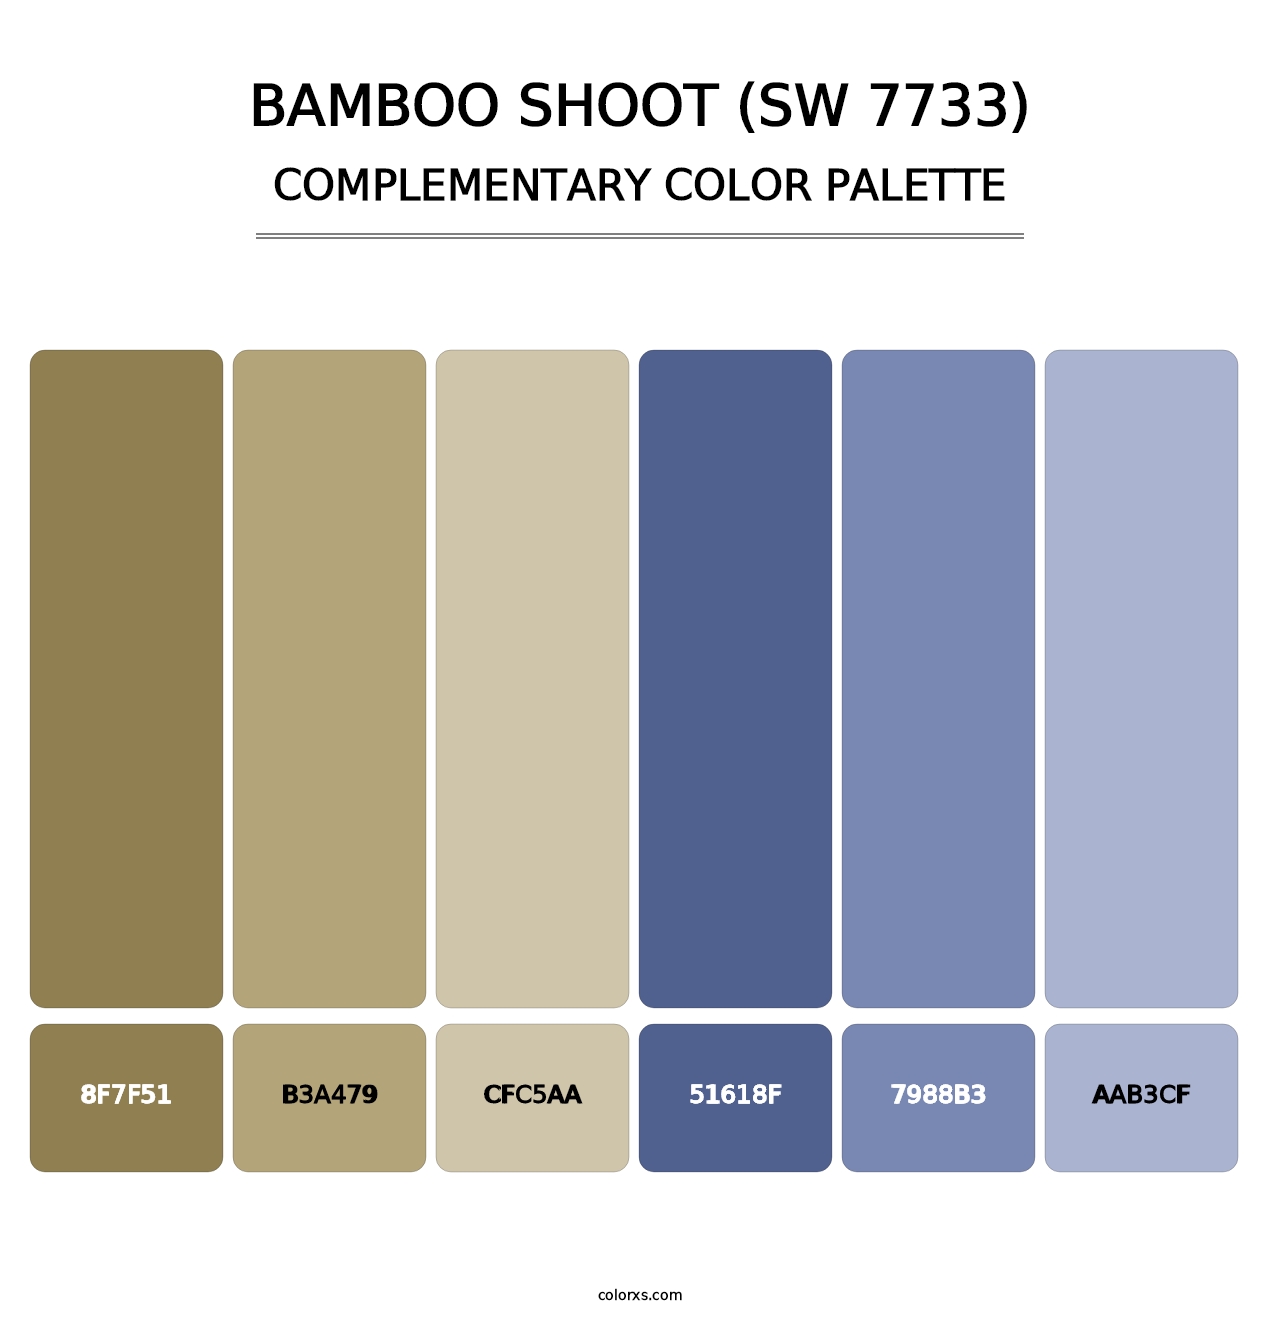 Bamboo Shoot (SW 7733) - Complementary Color Palette